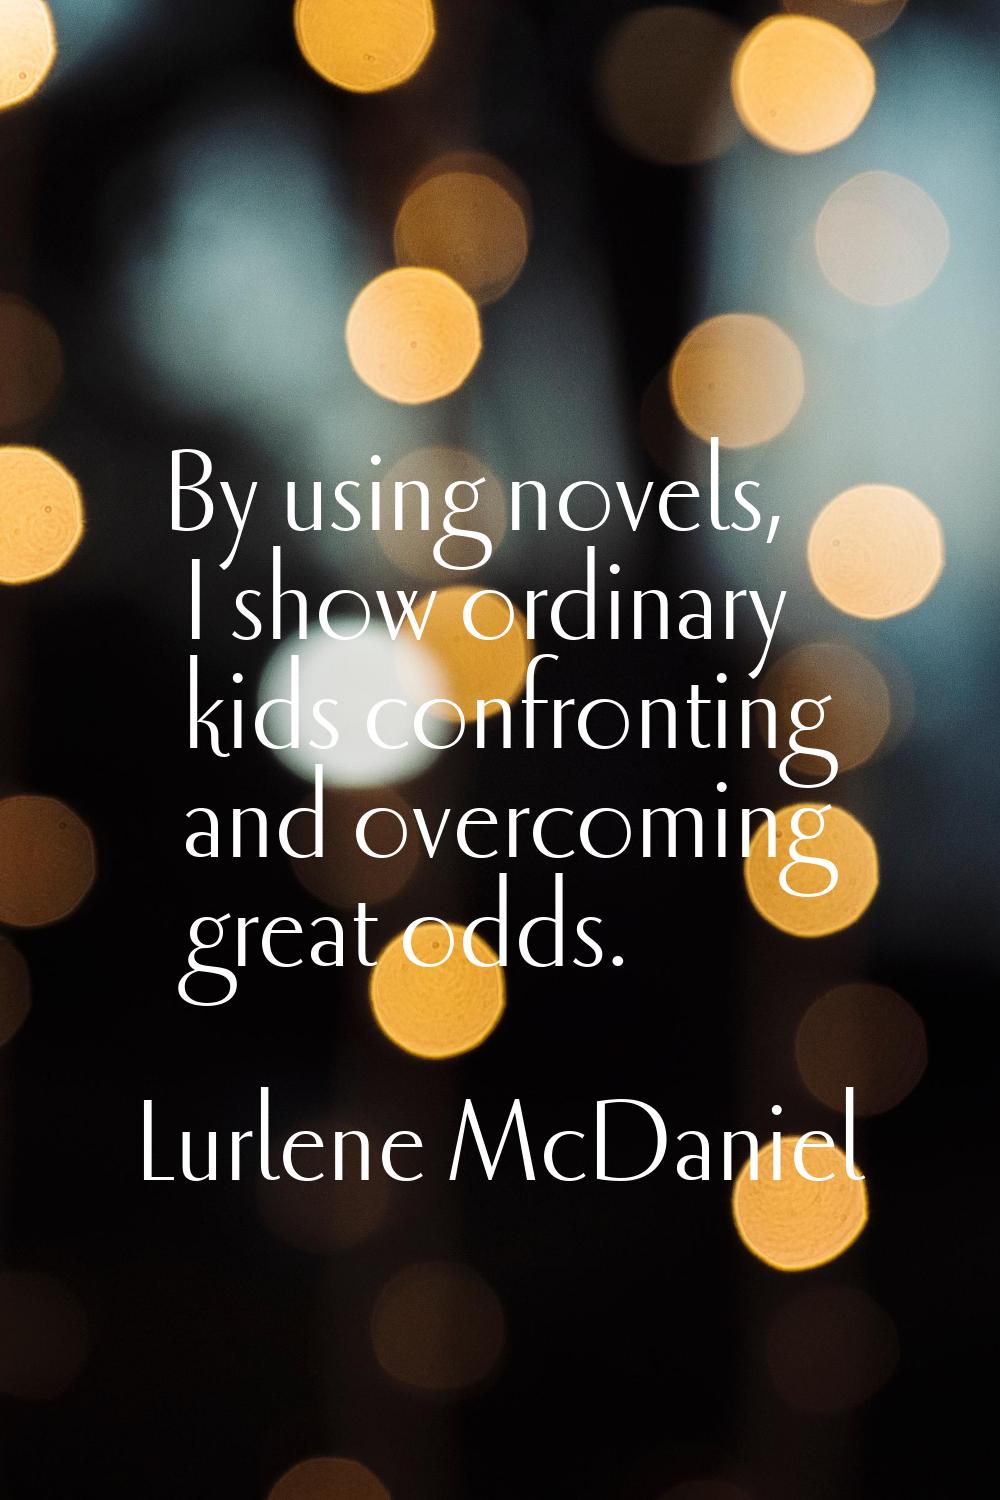 By using novels, I show ordinary kids confronting and overcoming great odds.